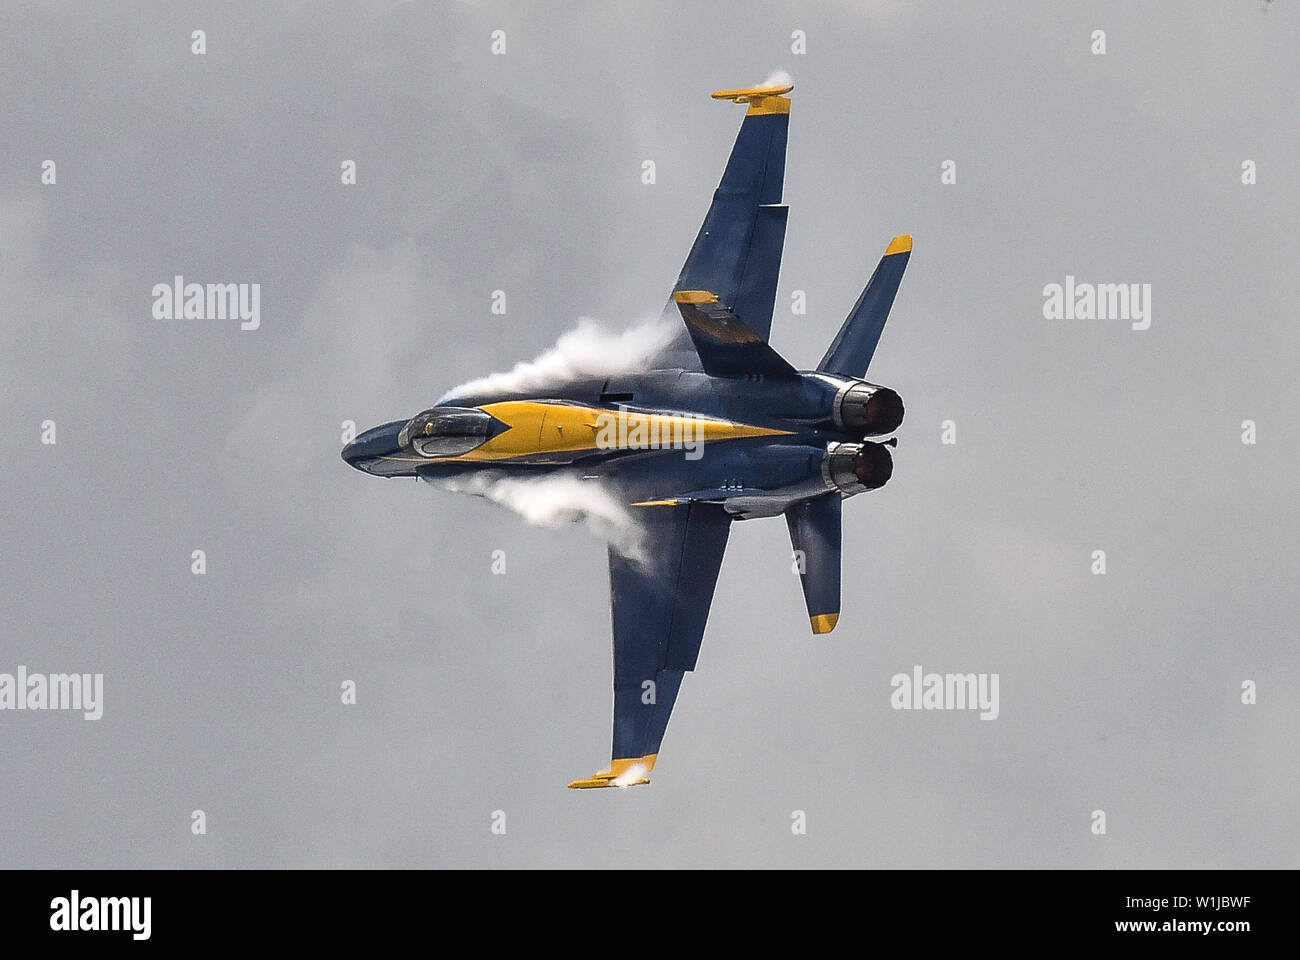 190629-N-UK306-1069 DAVENPORT, Iowa (June 29, 2019) Lt. Cmdr. Brandon Hempler, lead solo pilot assigned to the U.S. Navy Flight Demonstration Squadron, the Blue Angels, performs the minimum-radius turn maneuver during a demonstration at the Quad City Air Show at the Davenport Municipal Airport in Davenport, Iowa. The team is scheduled to conduct 61 flight demonstrations at 32 locations across the country to showcase the pride and professionalism of the U.S. Navy and Marine Corps to the American and Canadian public in 2019. (U.S. Navy photo by Mass Communication Specialist 2nd Class Timothy Sch Stock Photo